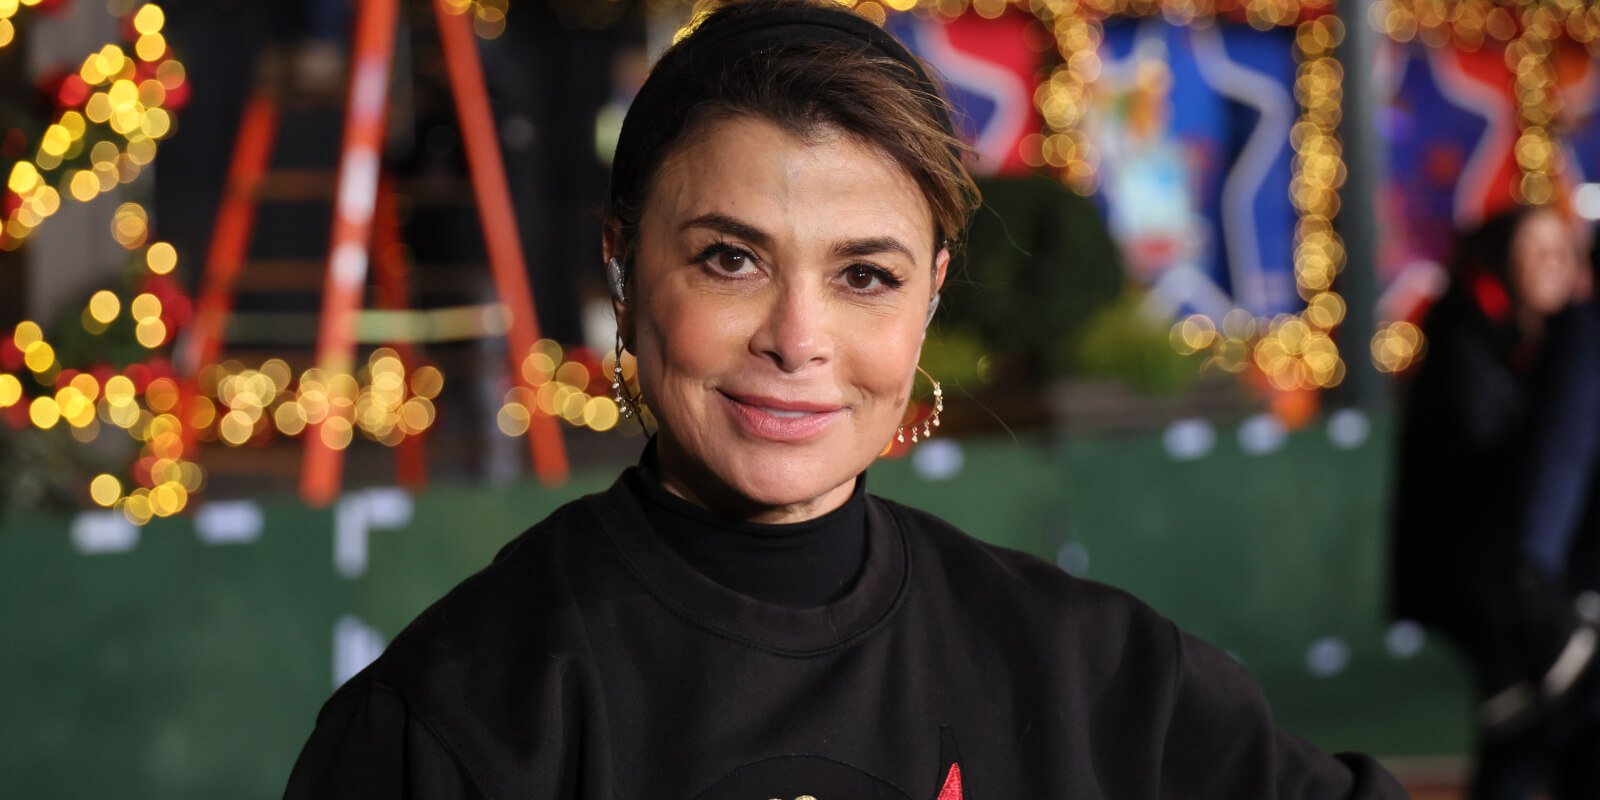 Paula Abdul during rehearsals for the Macy's Thanksgiving Parade in Nov. 2022.